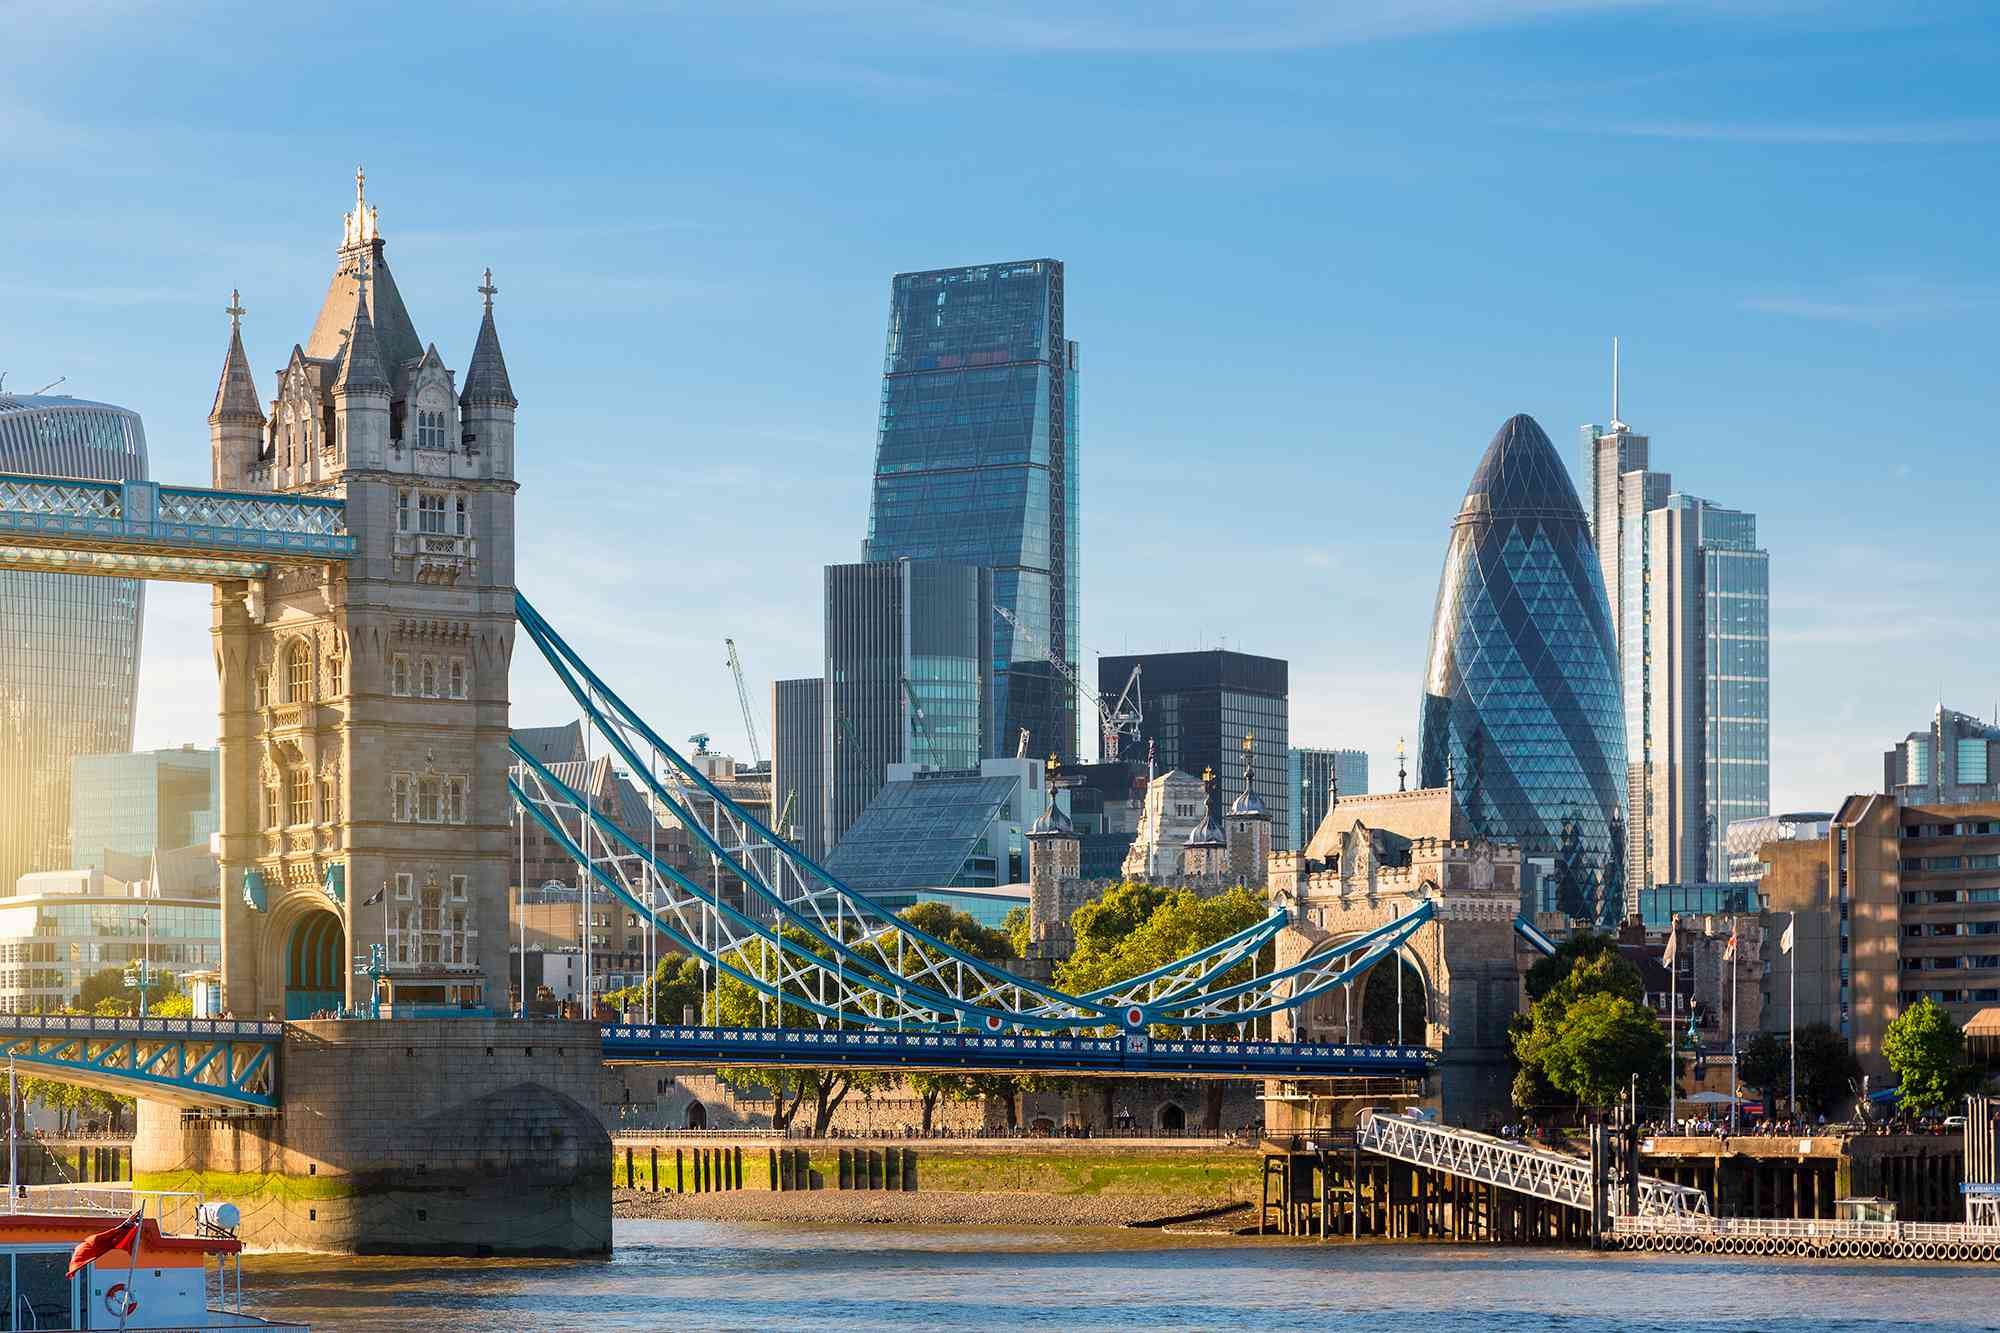 fly to london for only $299 on this new route from the u.s.